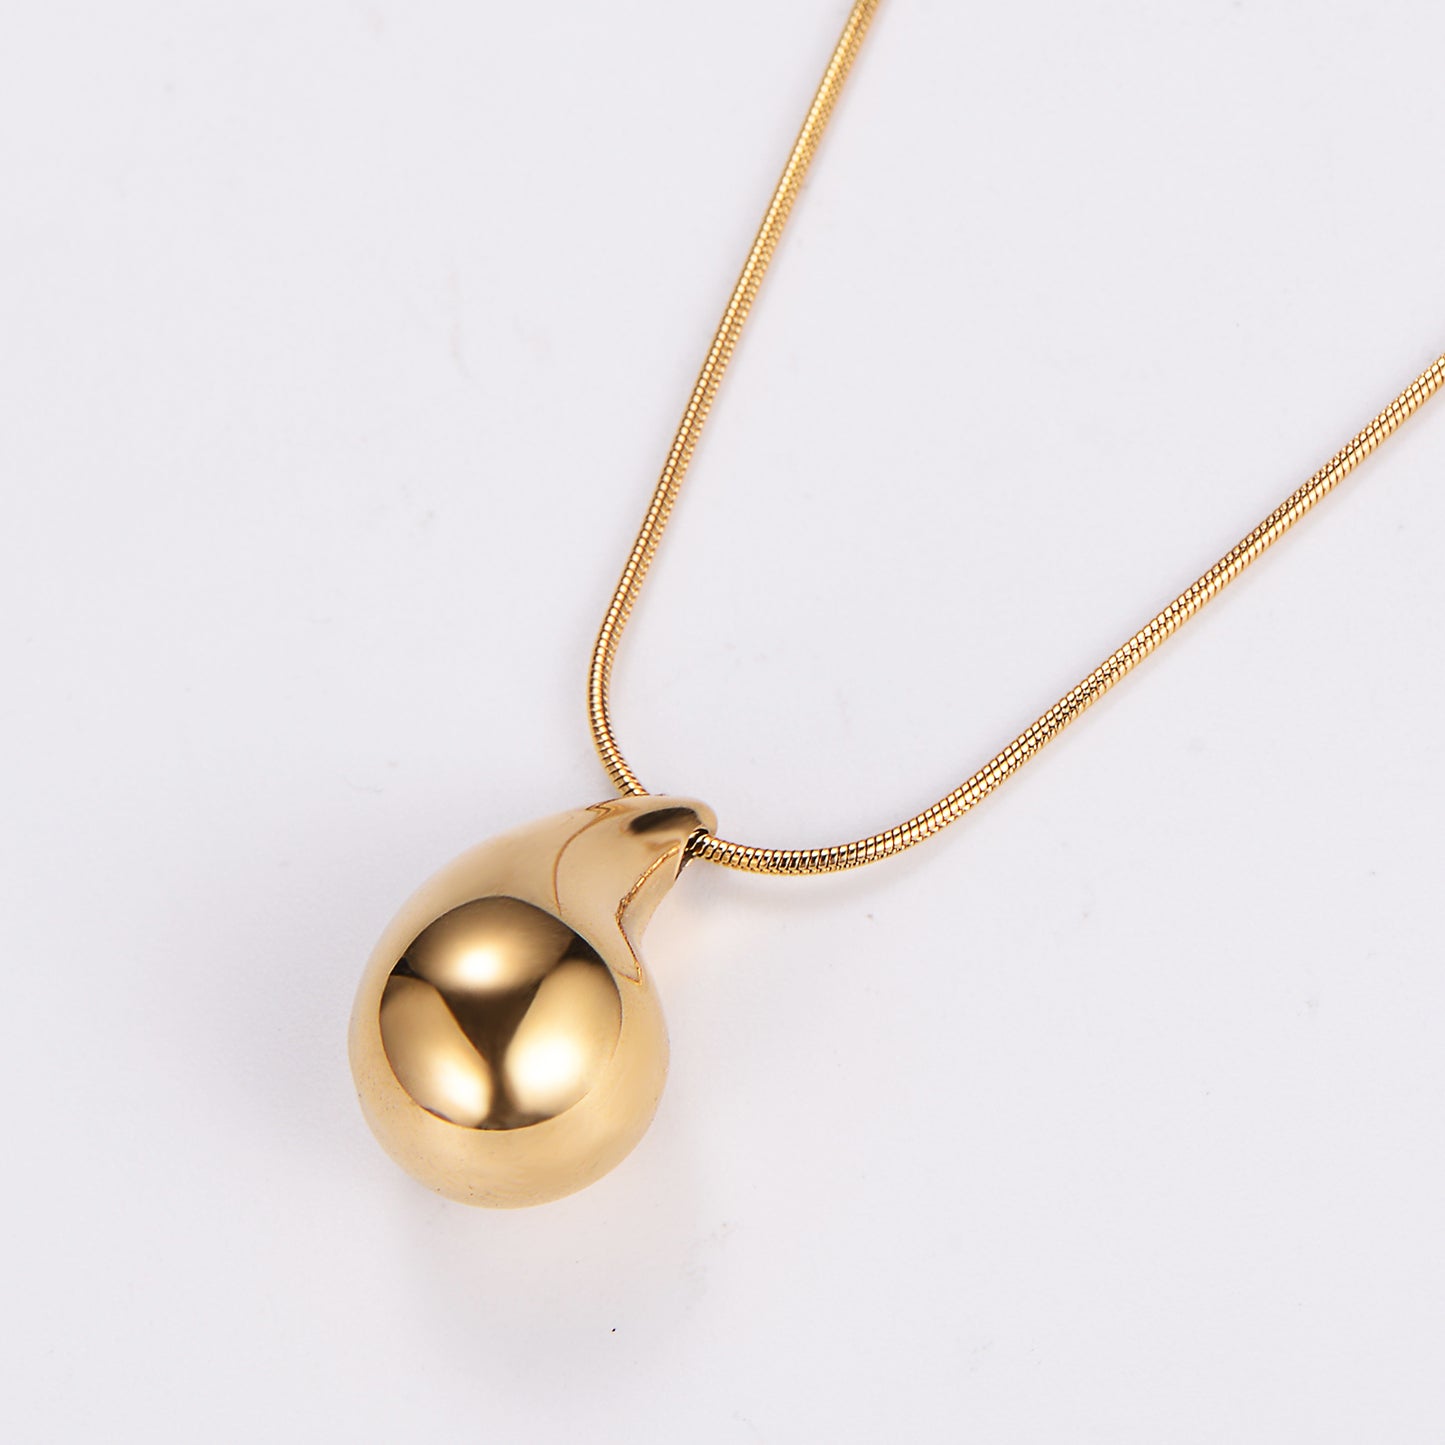 Stainless Steel Elegant Water Droplets Pendant Necklace